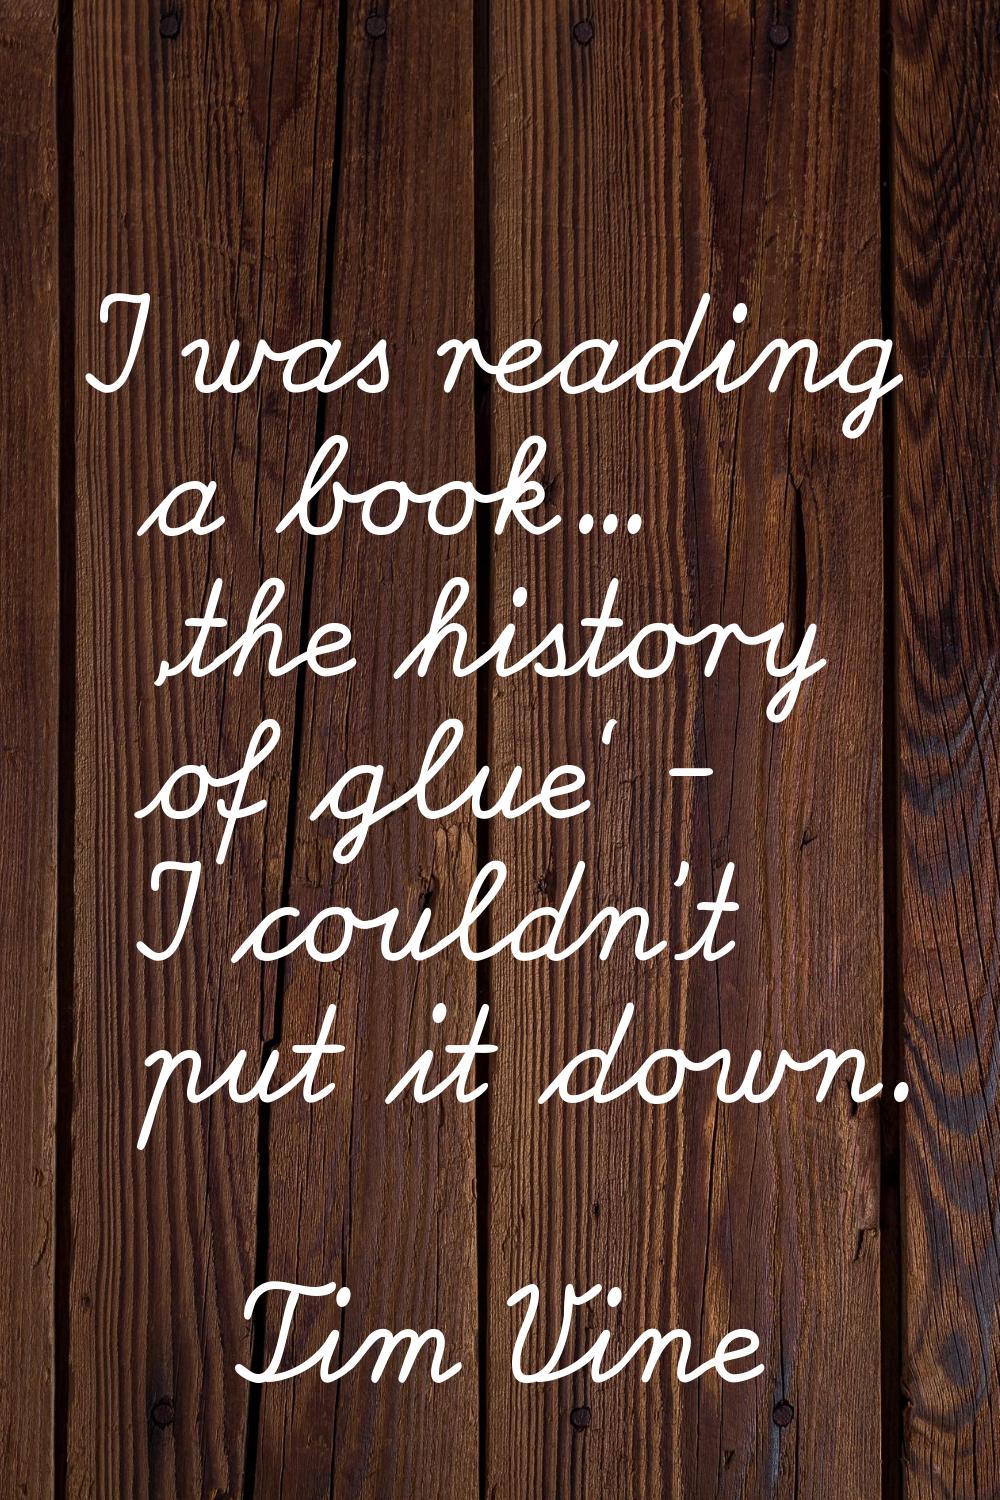 I was reading a book... 'the history of glue' - I couldn't put it down.